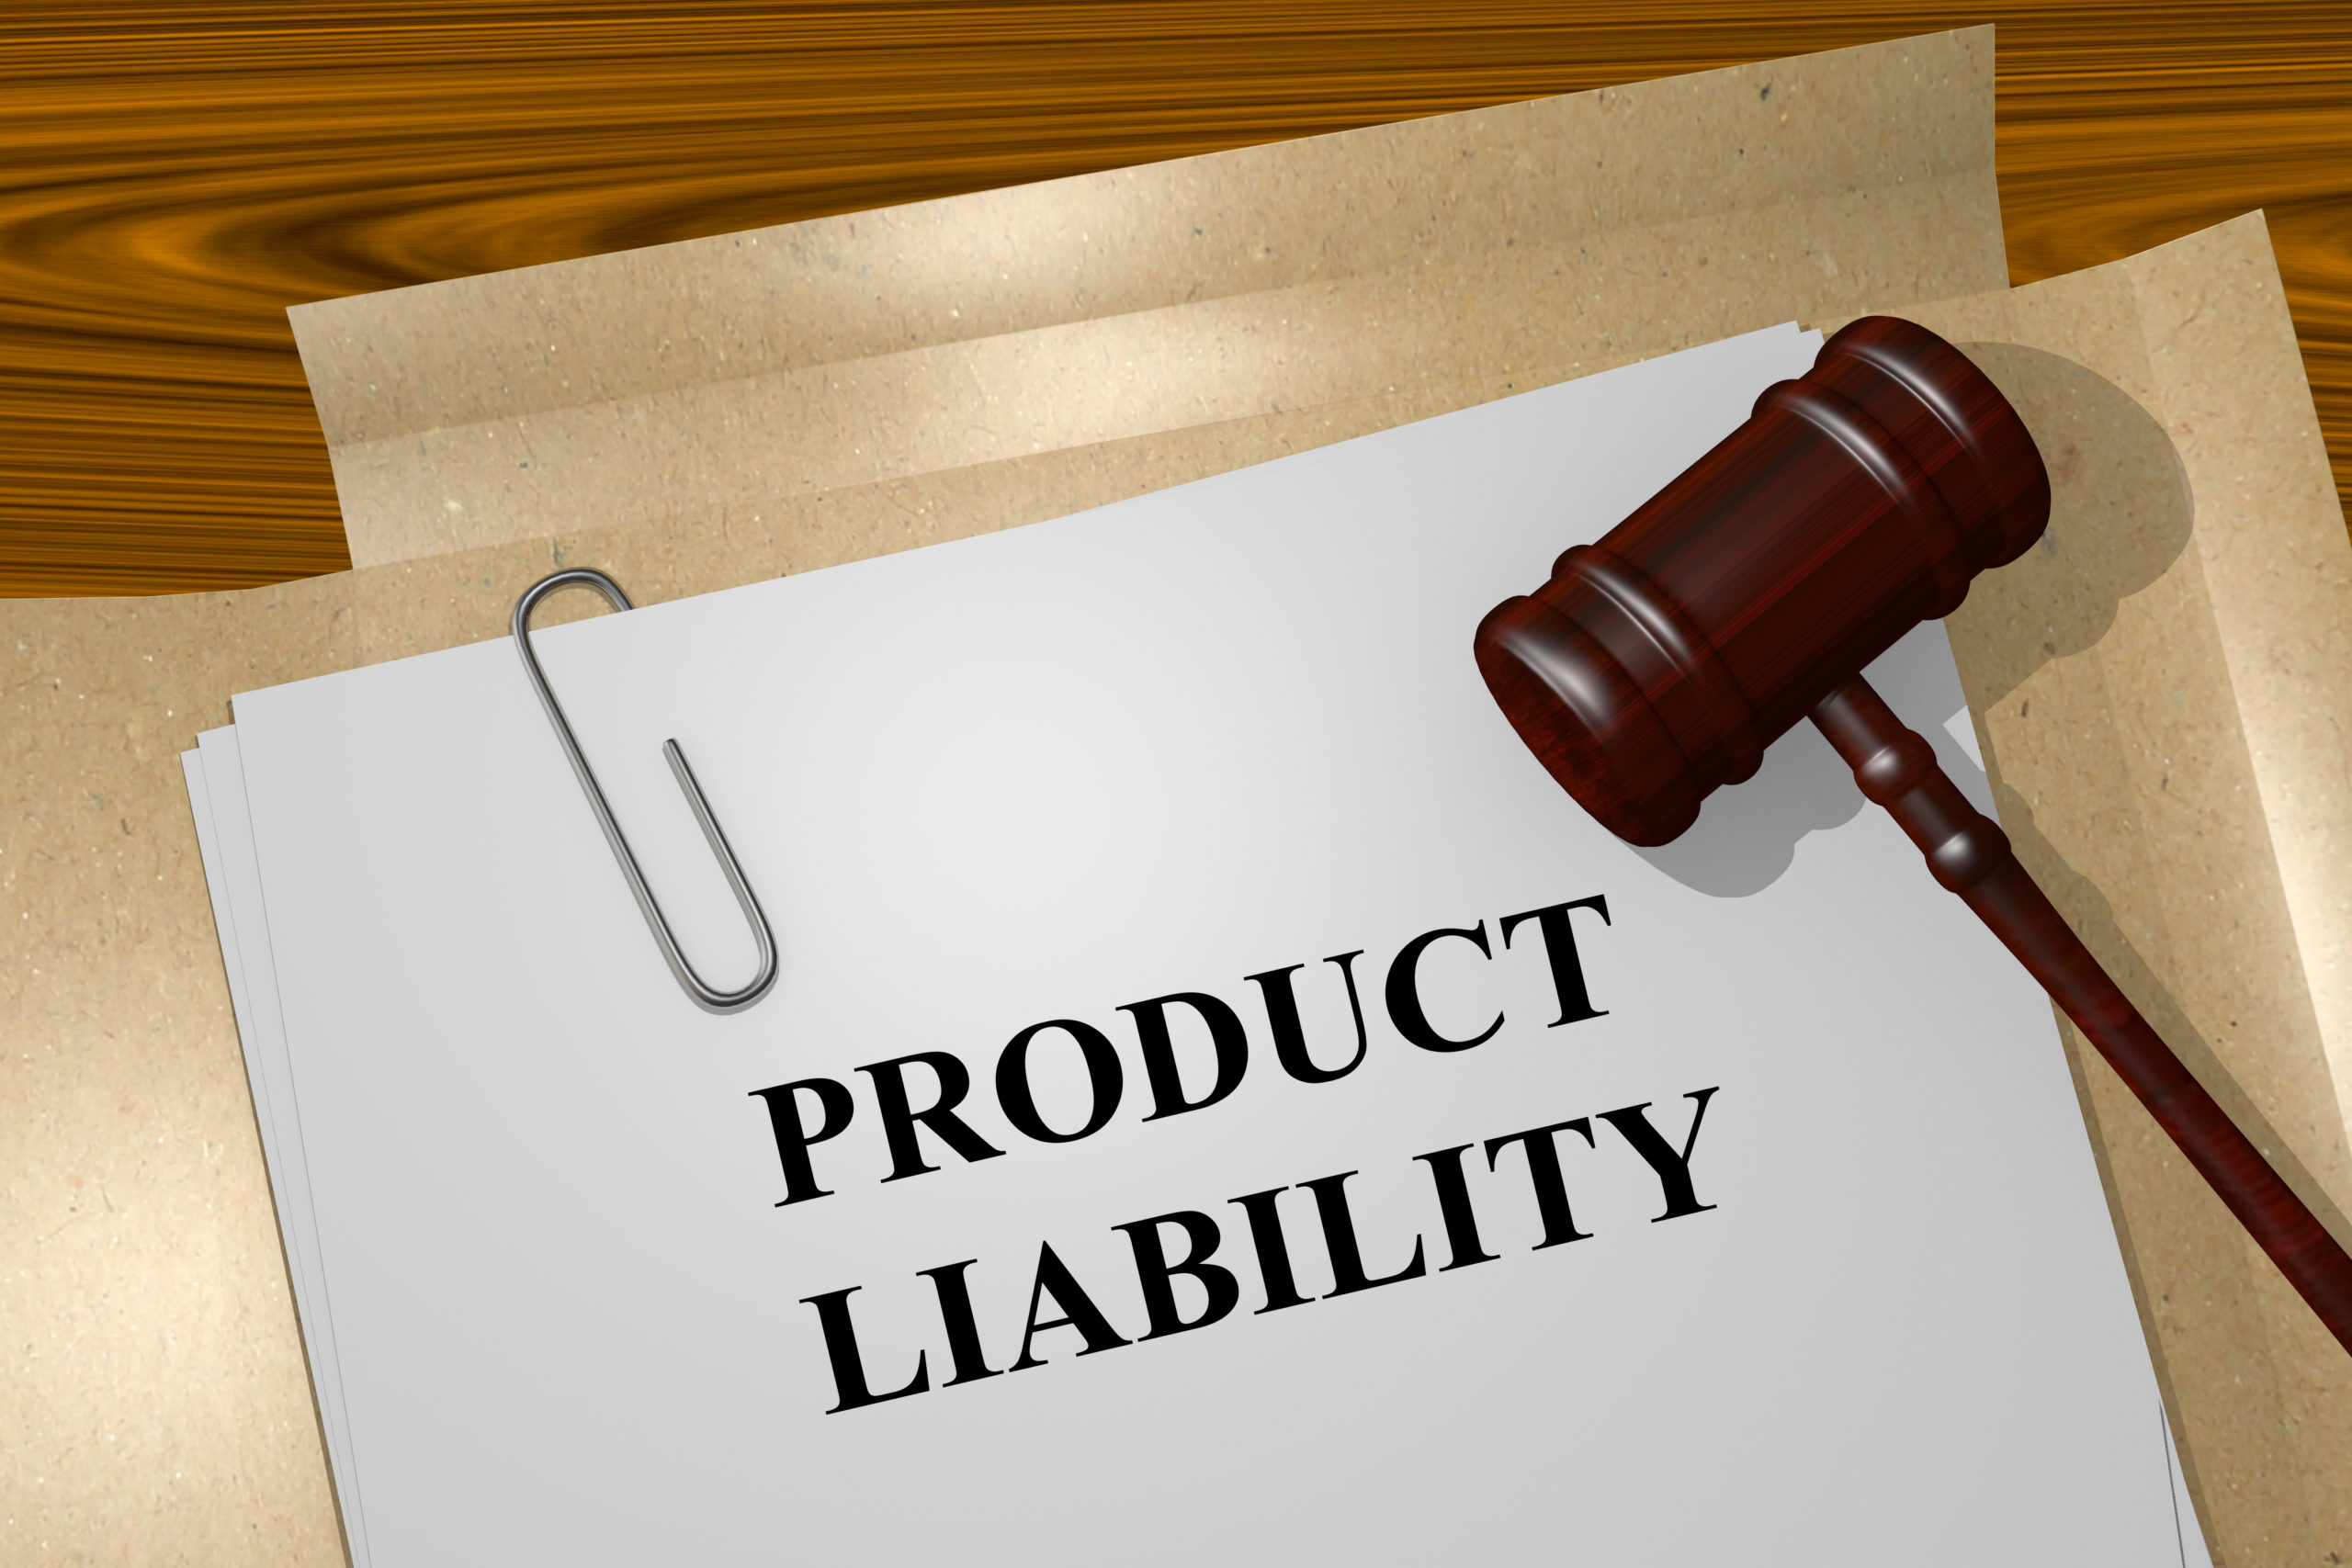  product defect lawyer in Las Vegas, NV